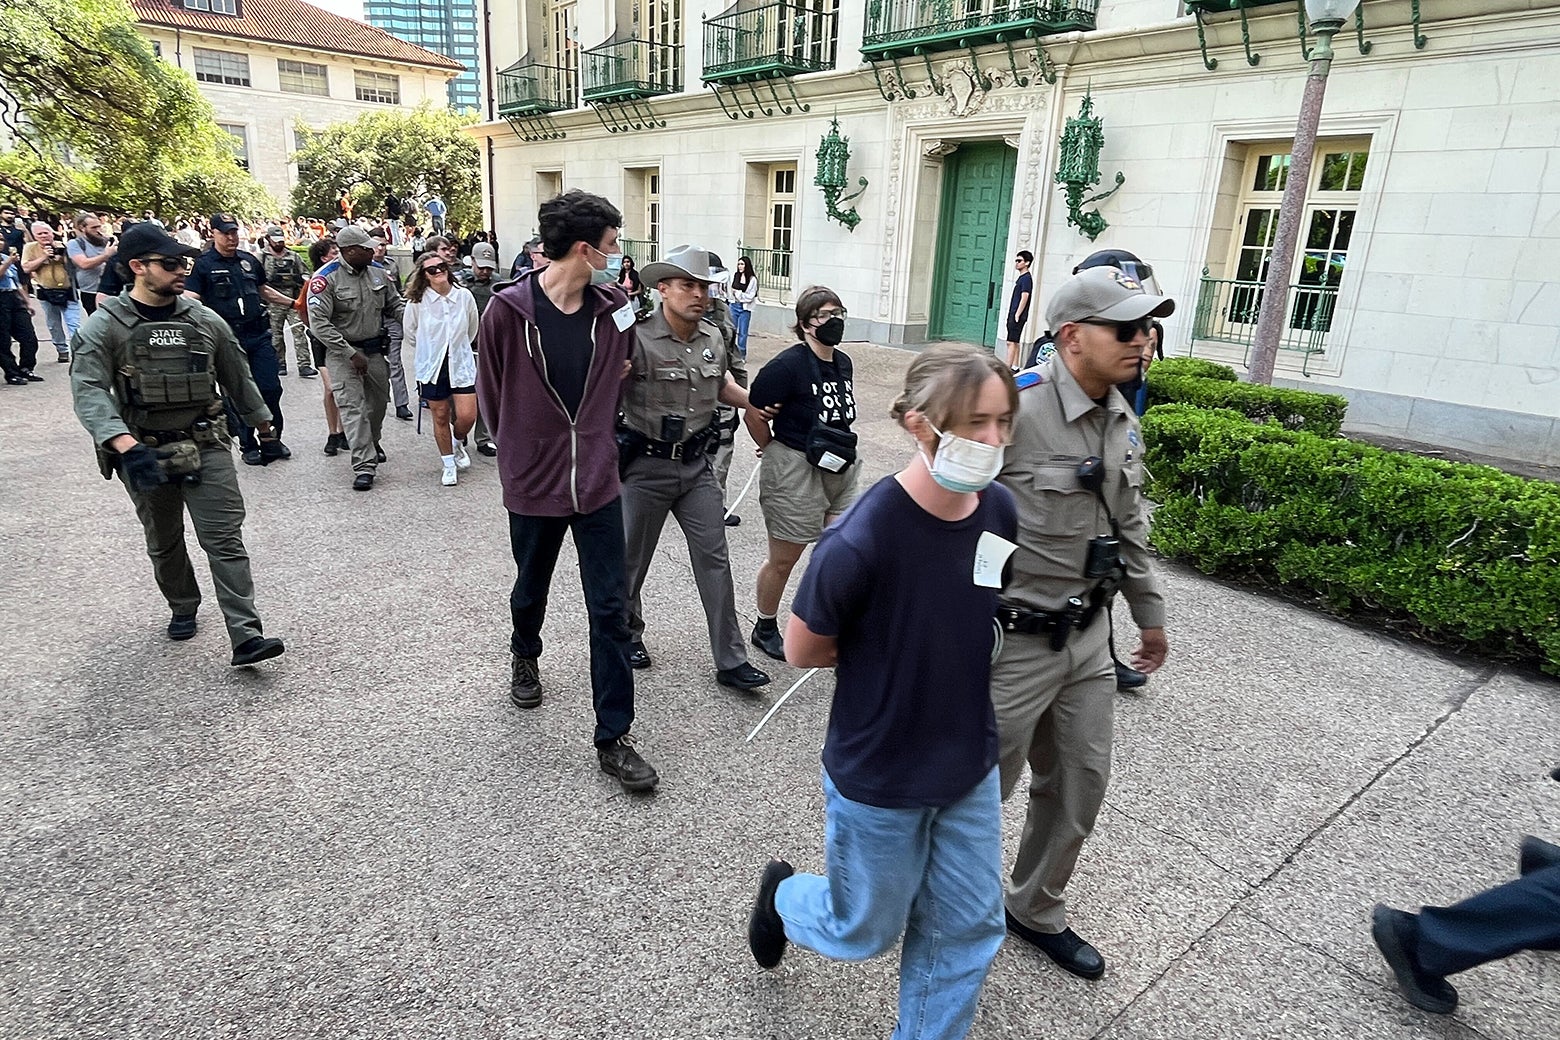 Protestors led away on campus in handcuffs.